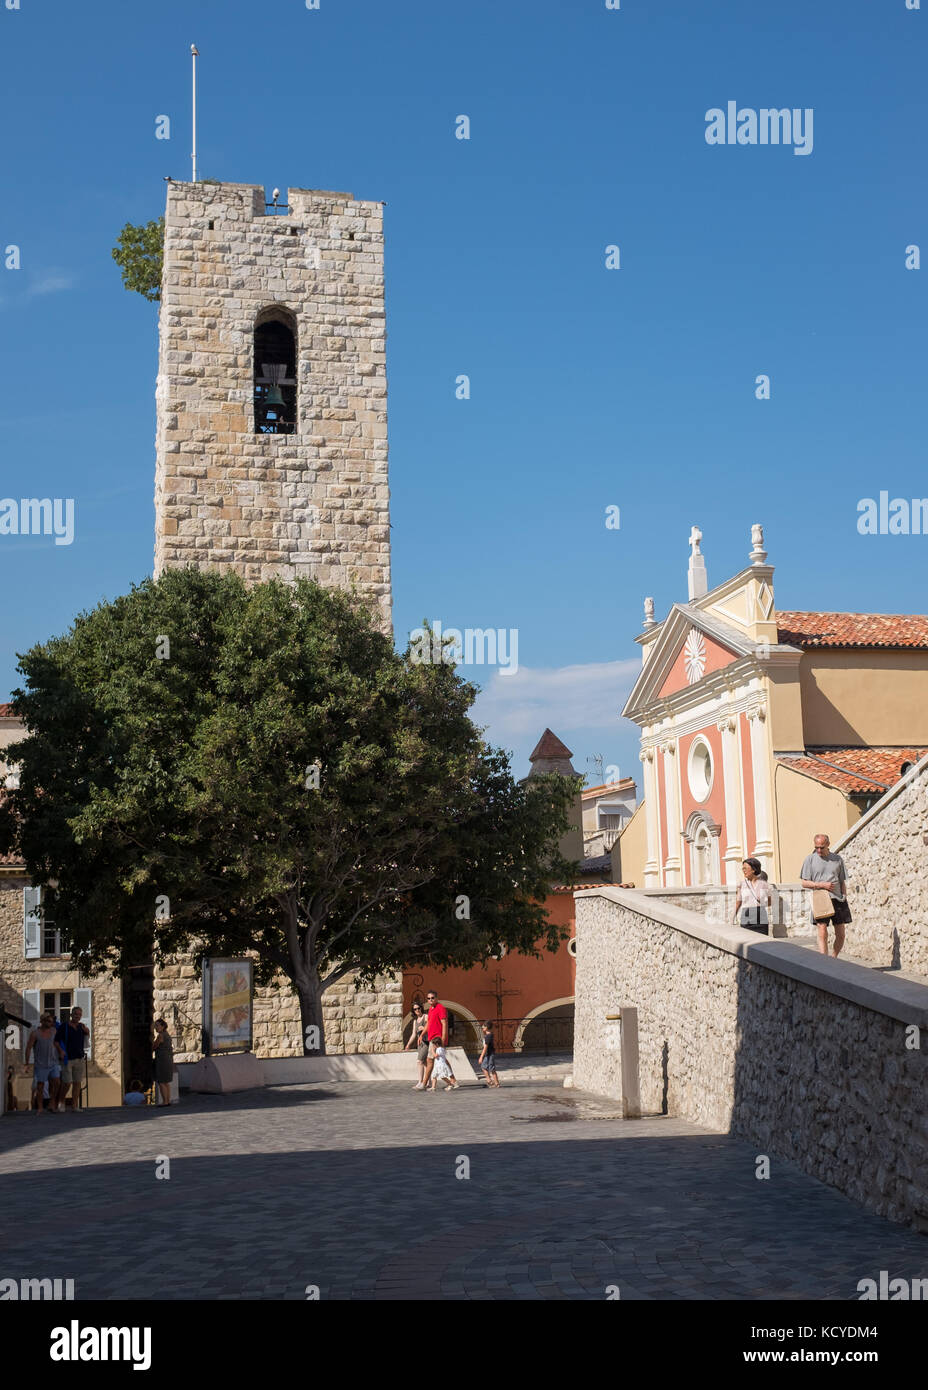 Exterior of Grimaldi tower and Antibes Cathedral, Antibes, Cote d'Azur, Provence-Alpes-Cote d'Azur, France. Stock Photo